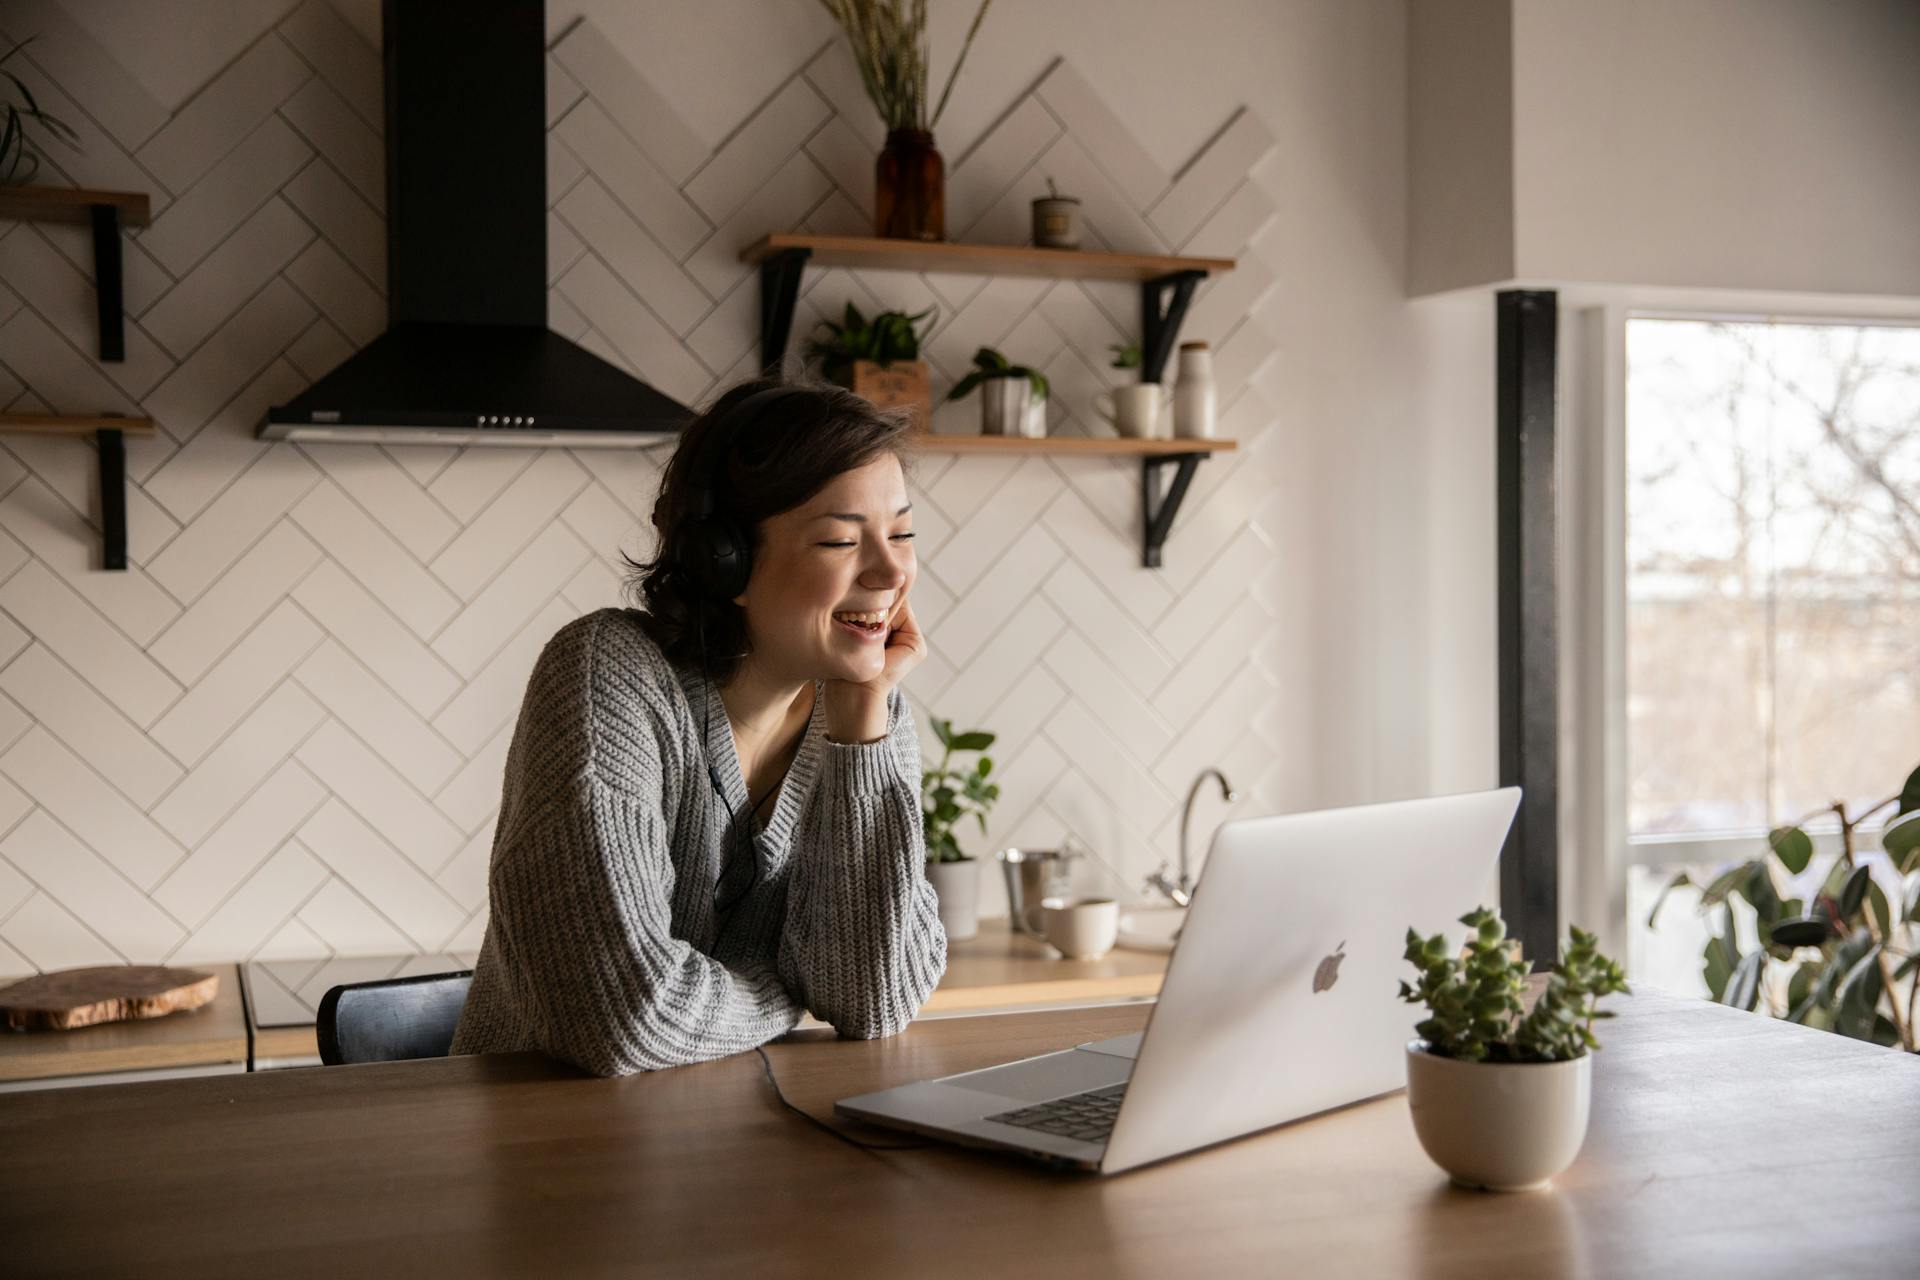 A smiling woman talking via laptop while sitting in the kitchen | Source: Pexels